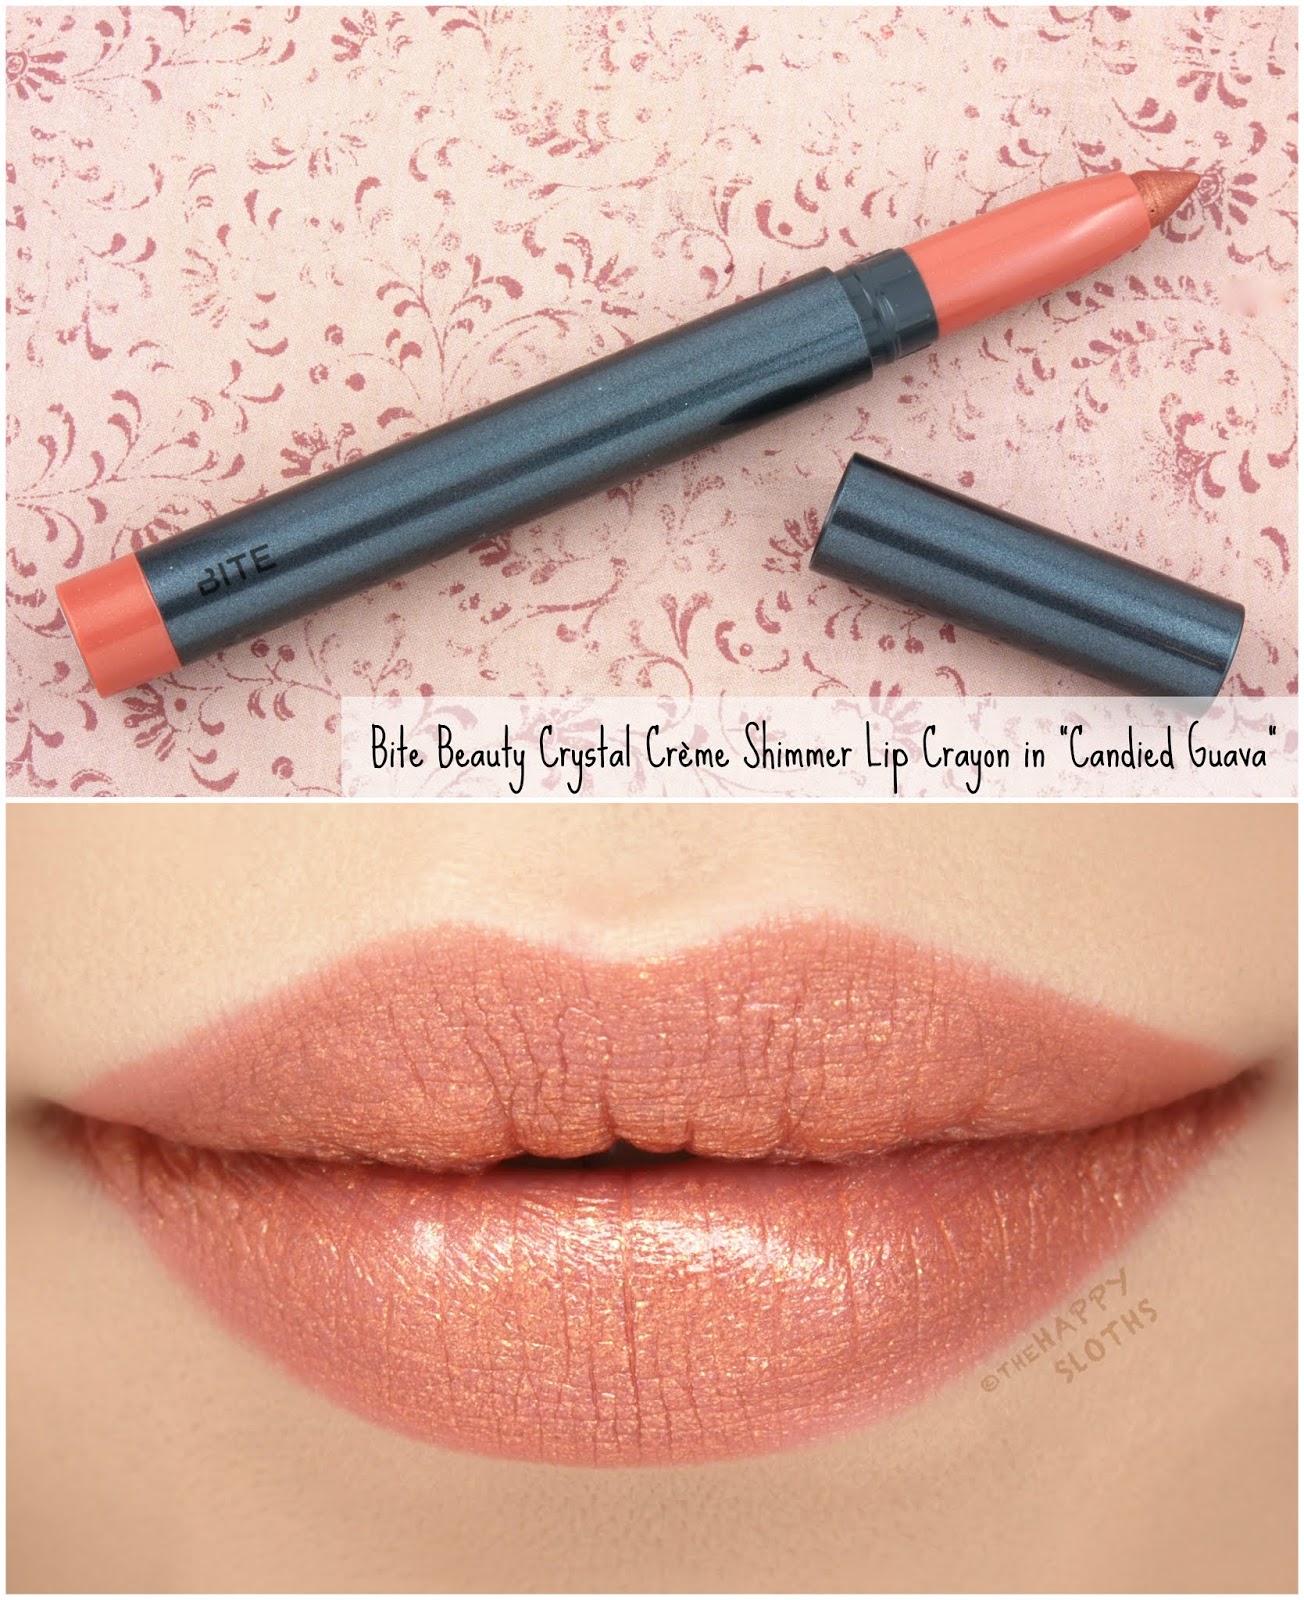 Bite Beauty | Crystal Crème Shimmer Lip Crayon in "Candied Guava": Review and Swatches